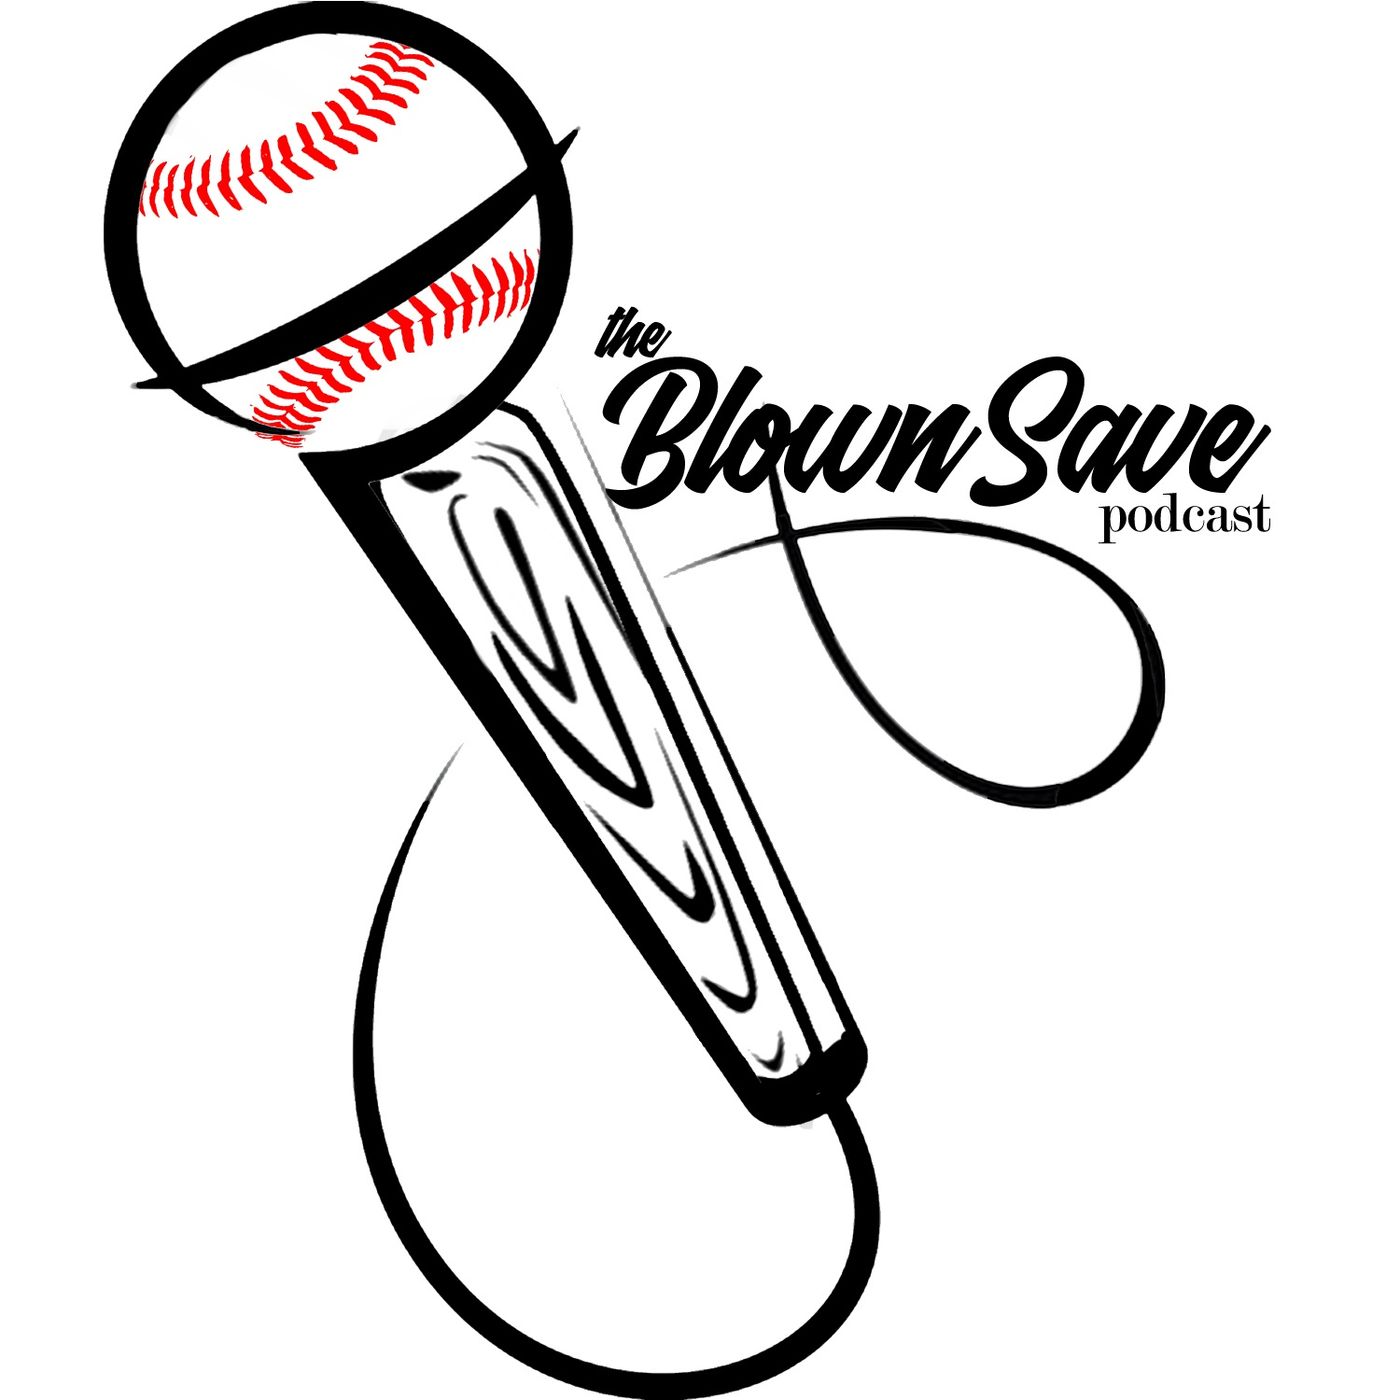 Footballs Back and So are we! The Blown Save Podcast S3 Ep 11